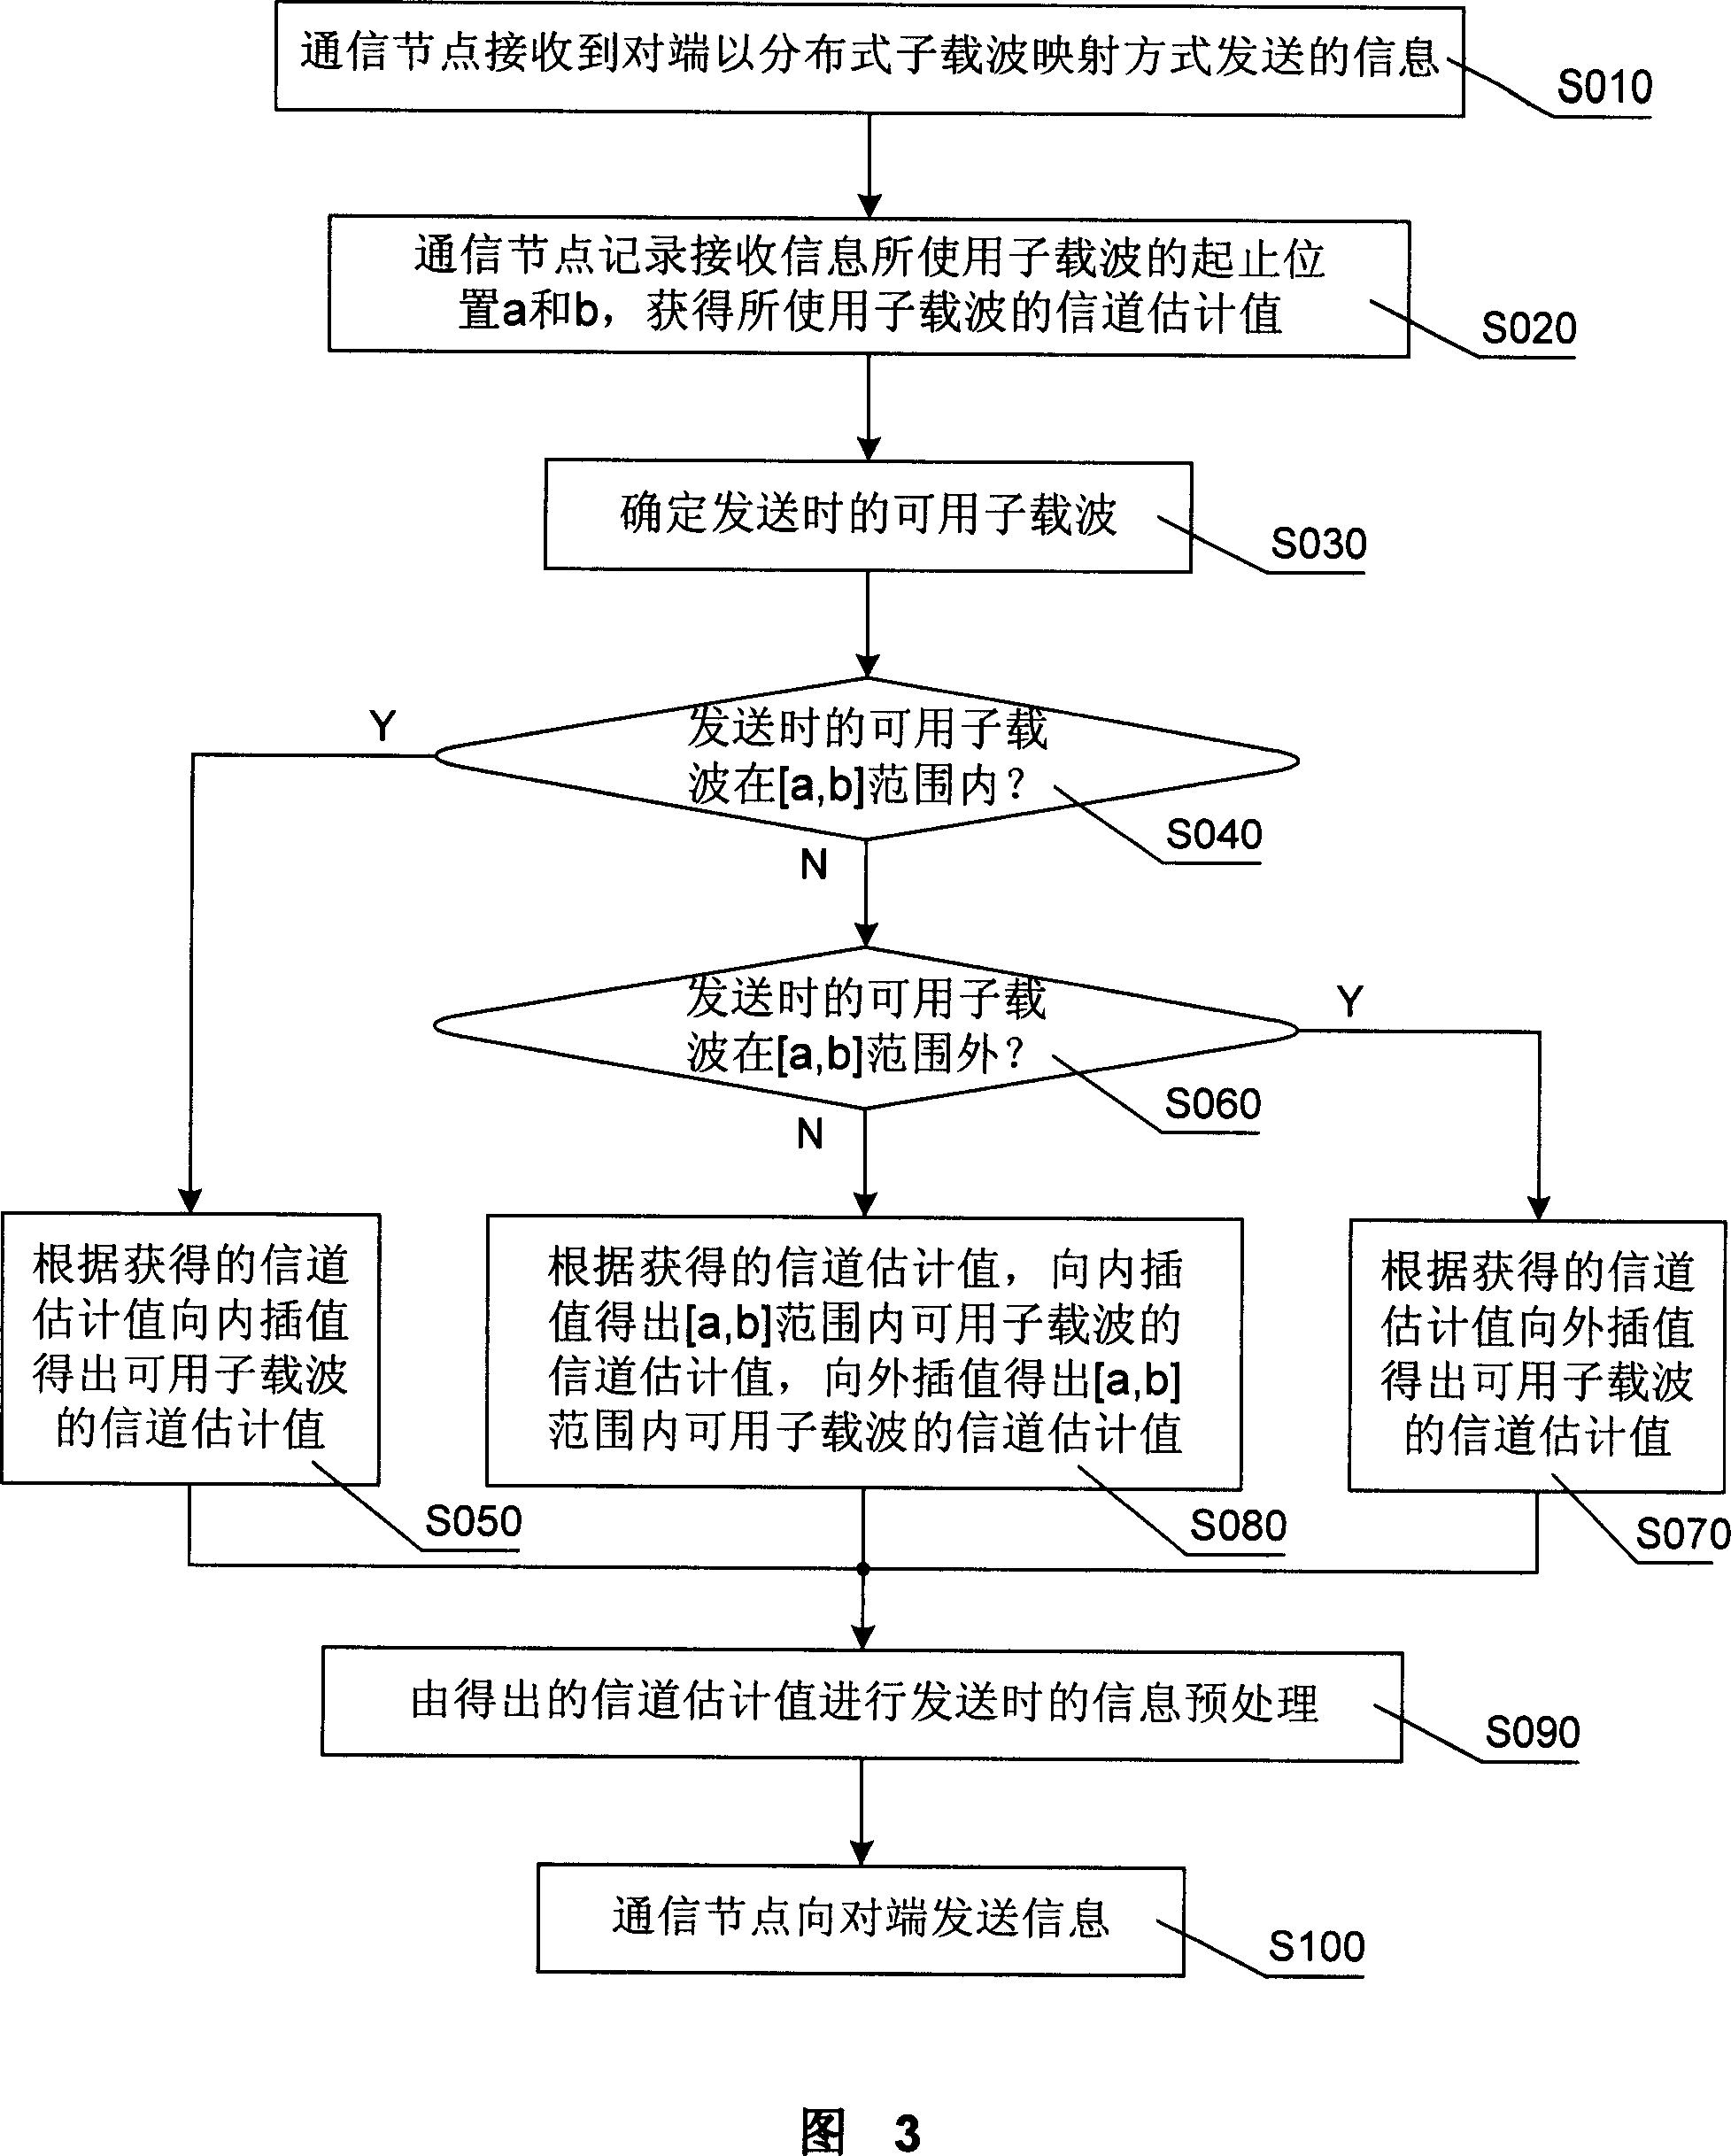 Method and apparatus for implementing symmetry of channel in broadband orthogonal frequency division multiplexing system